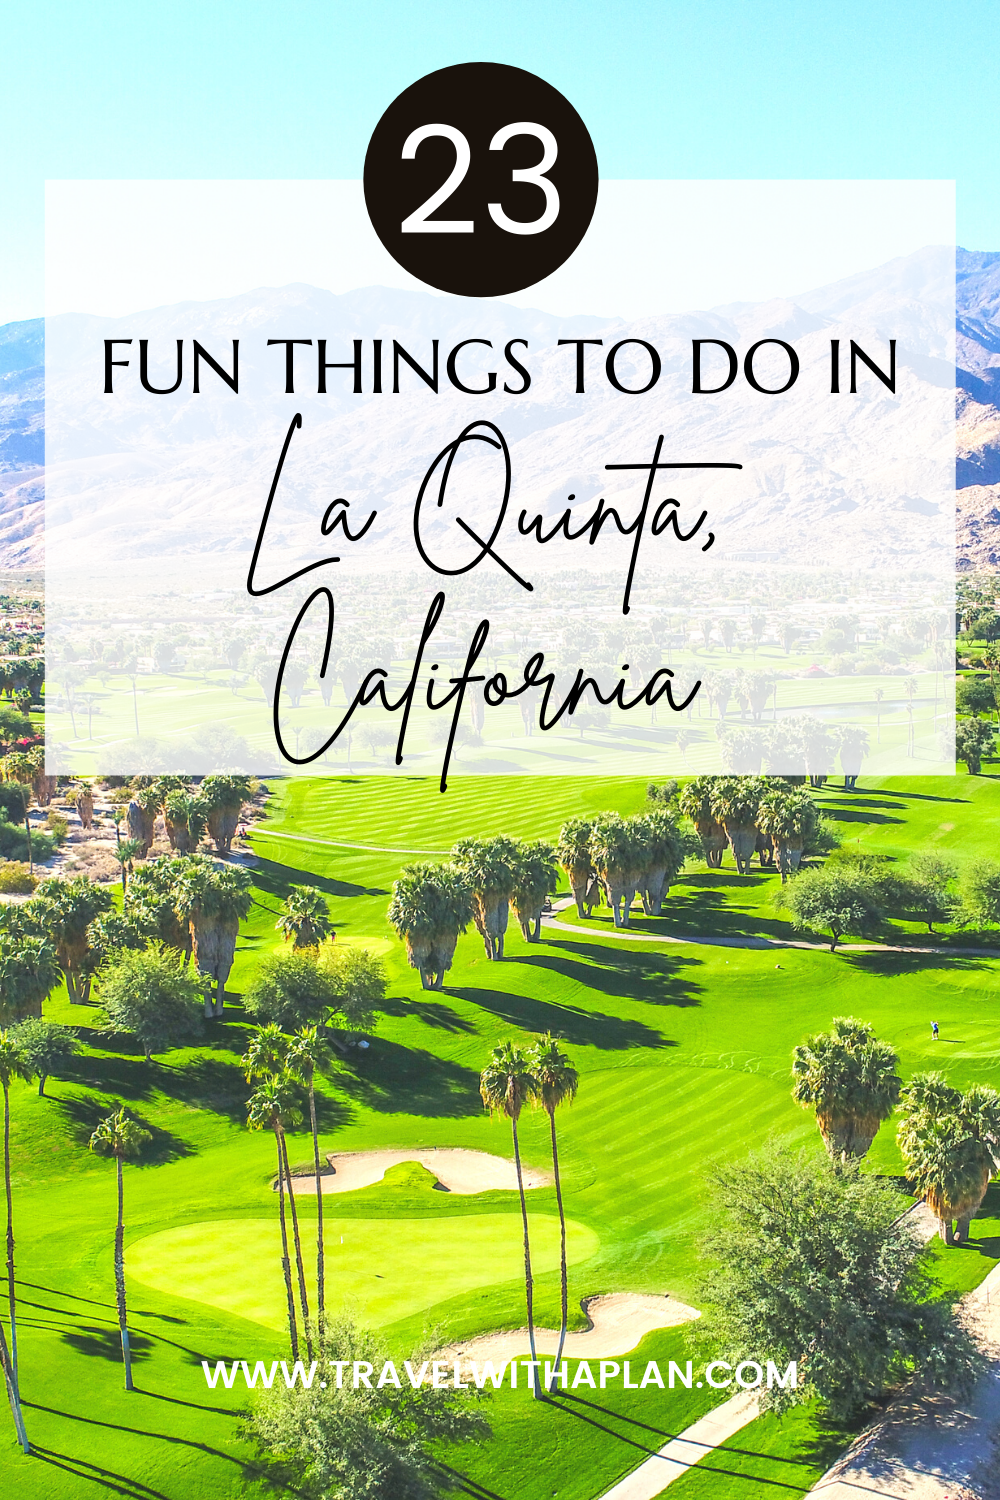 Find out the best things to do in La Quinta, California from top US family travel blog, Travel With A Plan